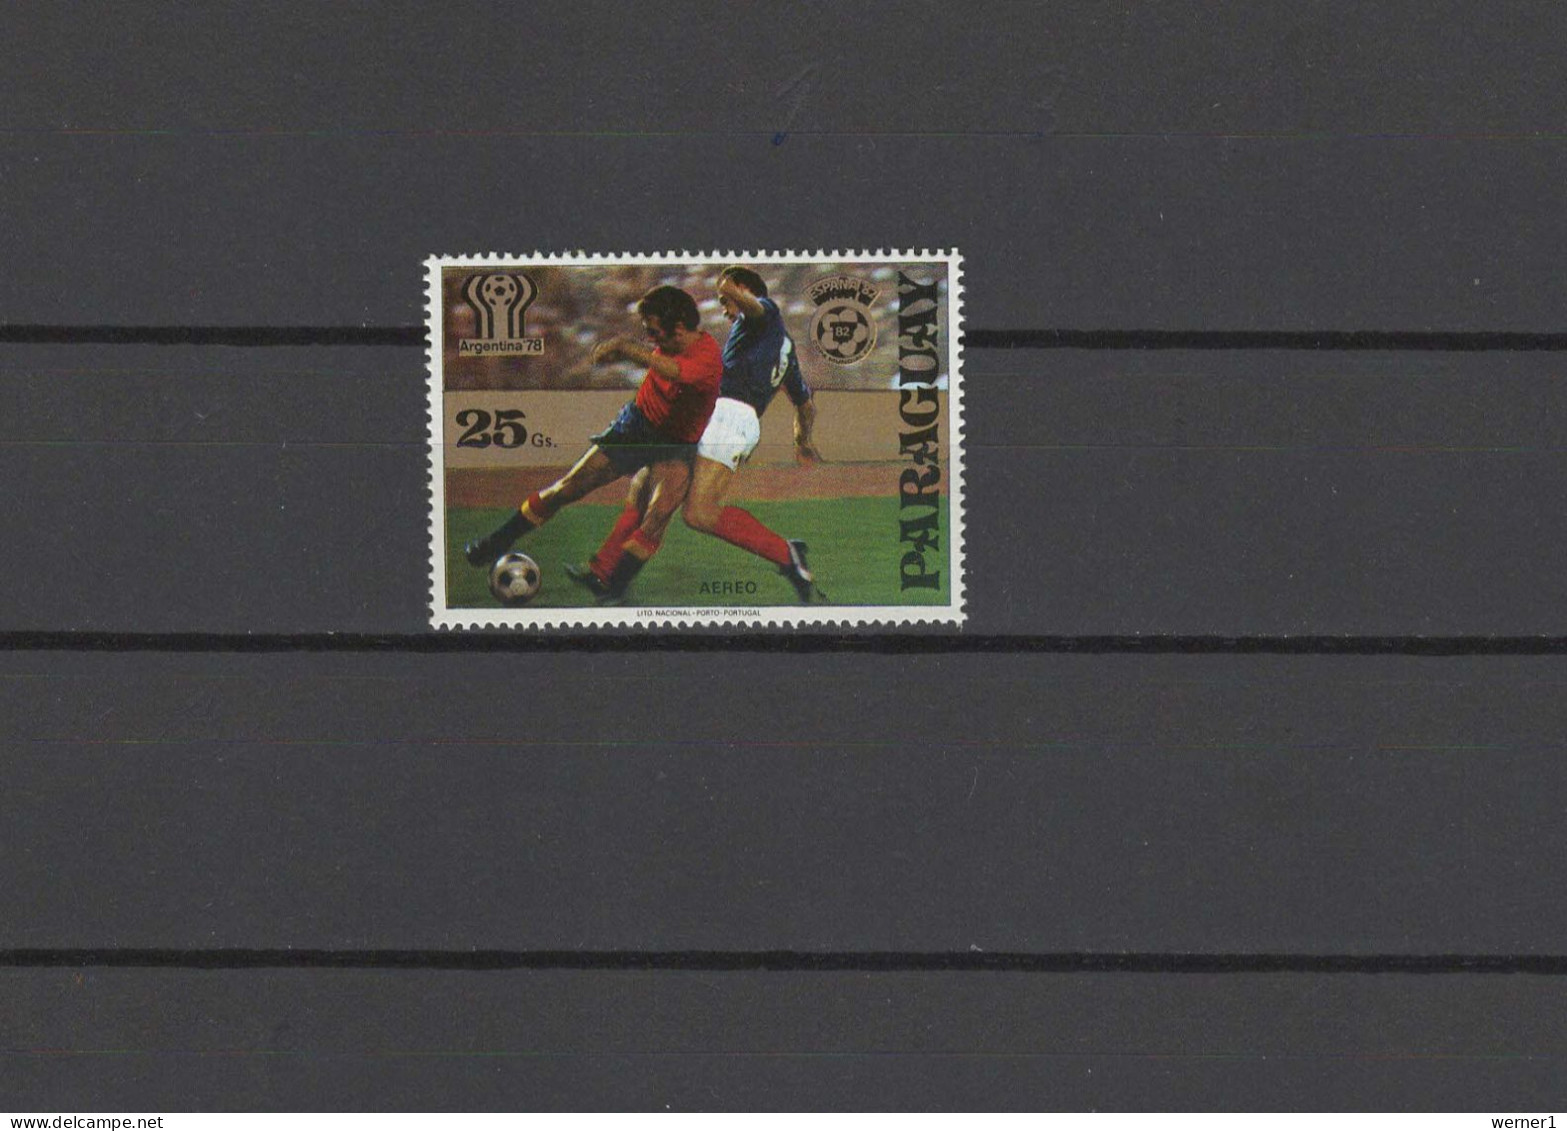 Paraguay 1979 Football Soccer World Cup Stamp MNH - 1982 – Espagne